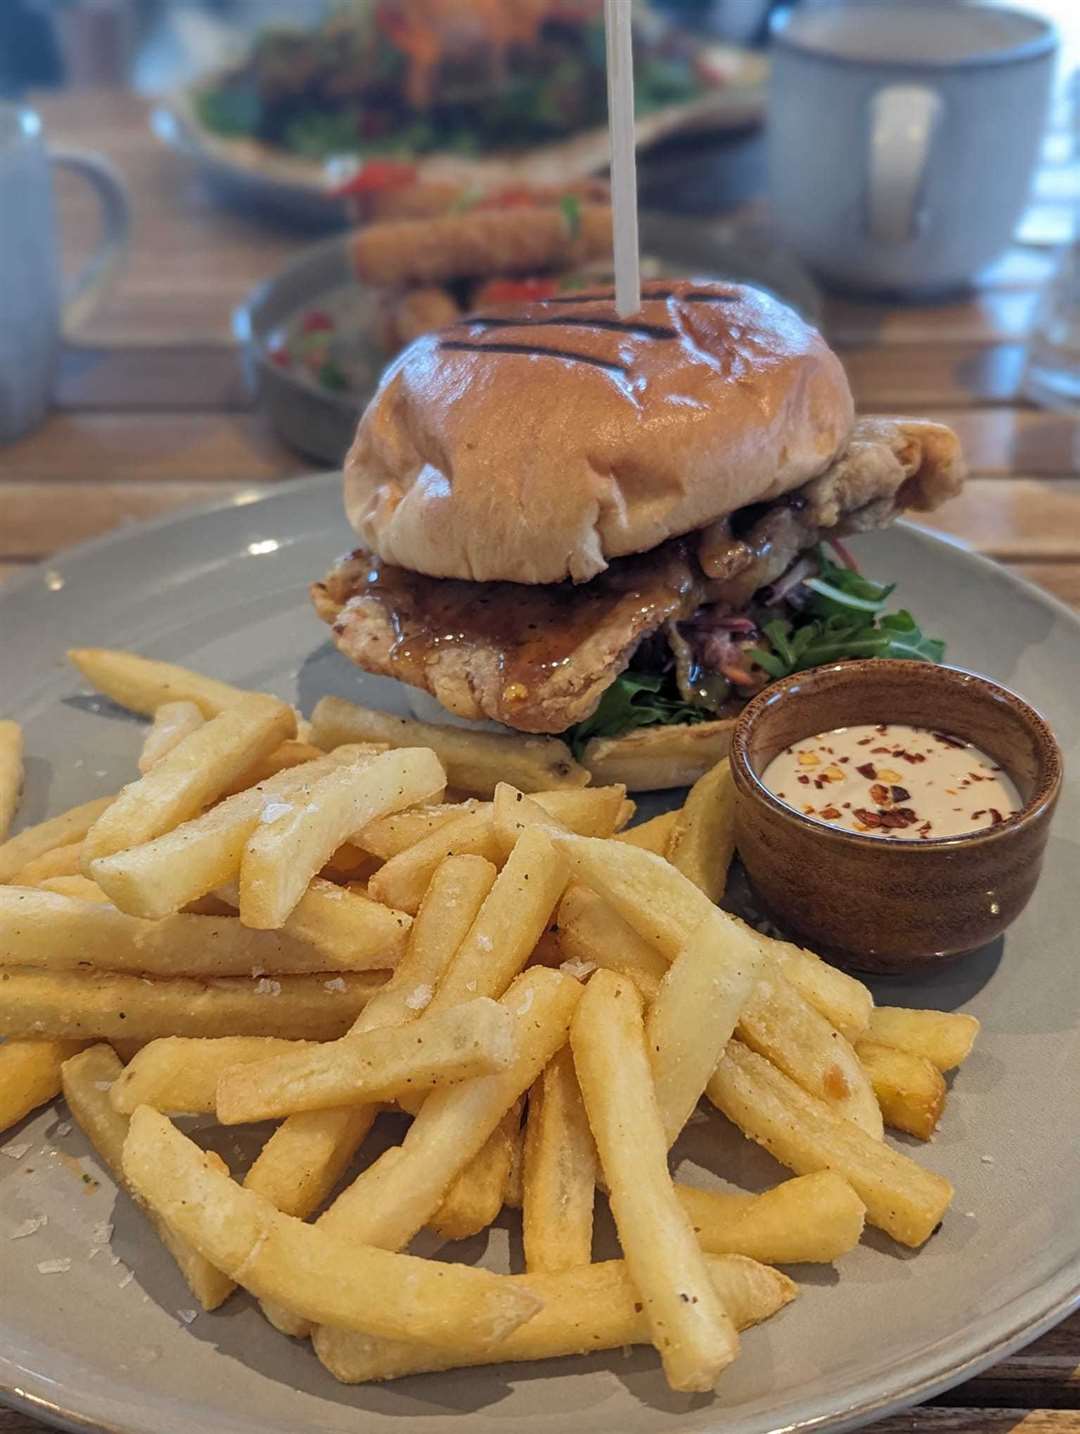 Sam chose the sticky chicken burger with fries - priced at £14.95. Picture: Suzanne Day